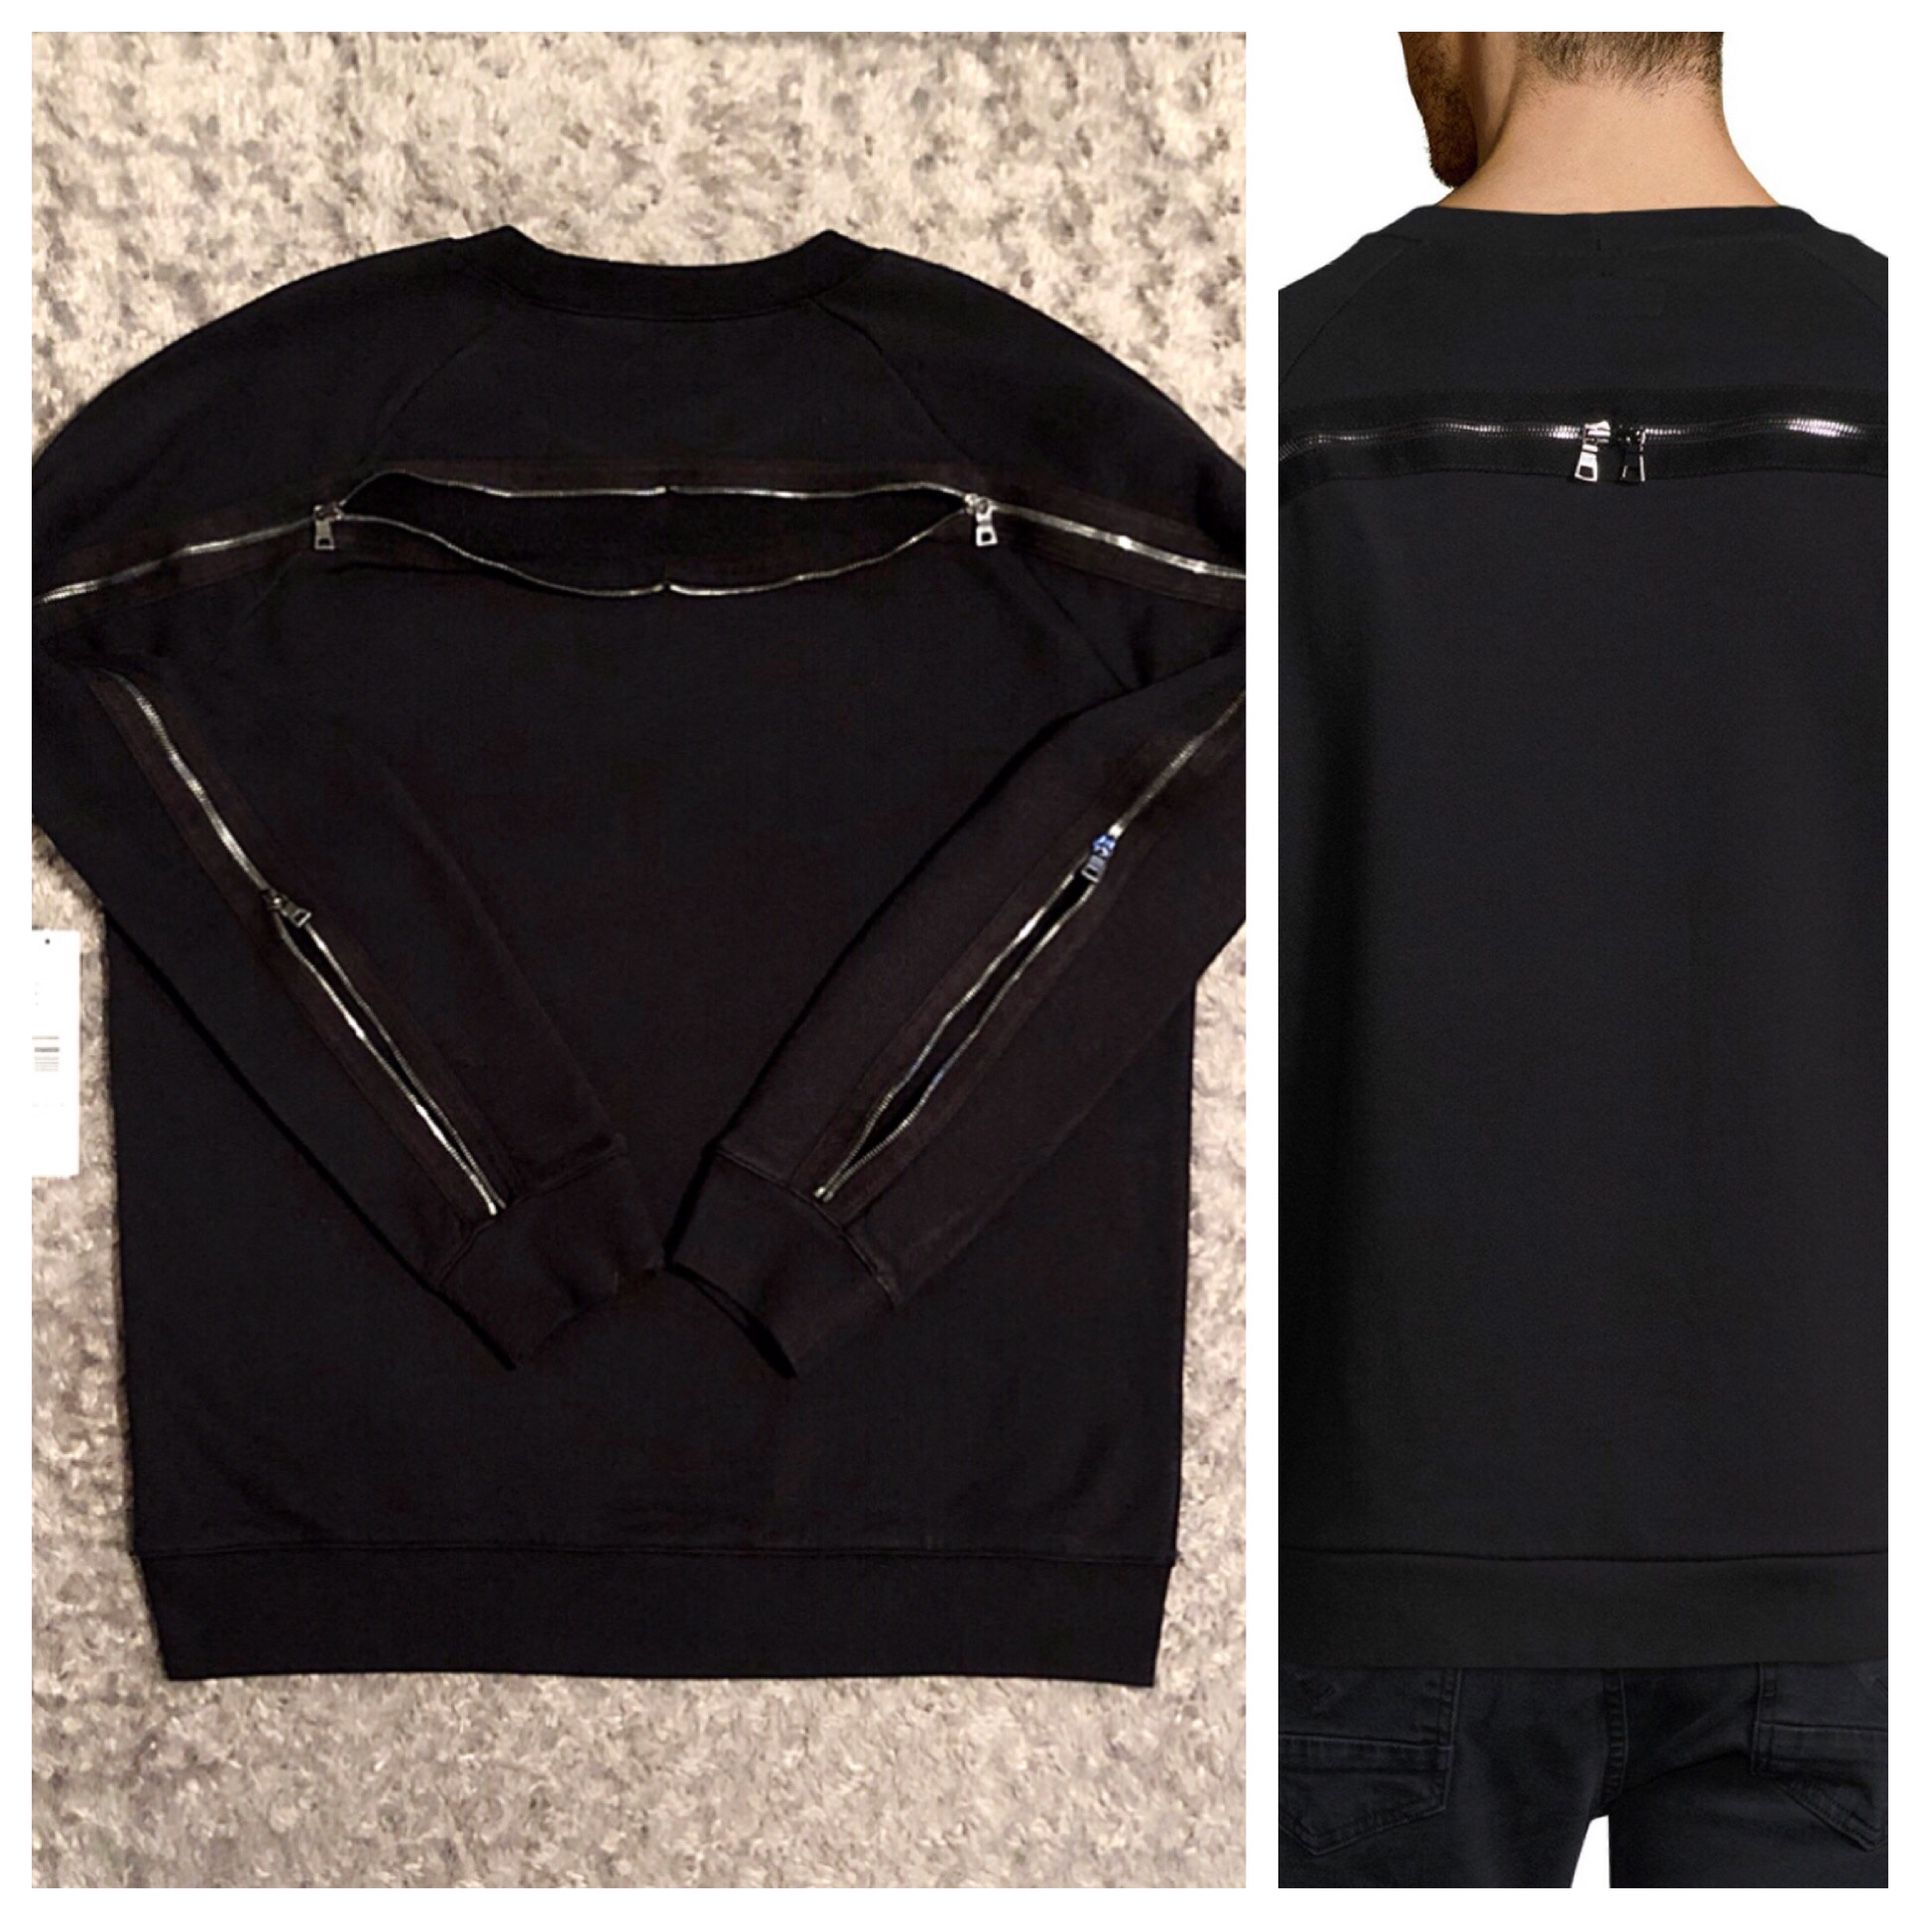 Mens Hudson Sweatshirt paid $225 size XL Classic Pullover Sweatshirt with 2 fully functional zippers that open and closes from one into the other. Ve